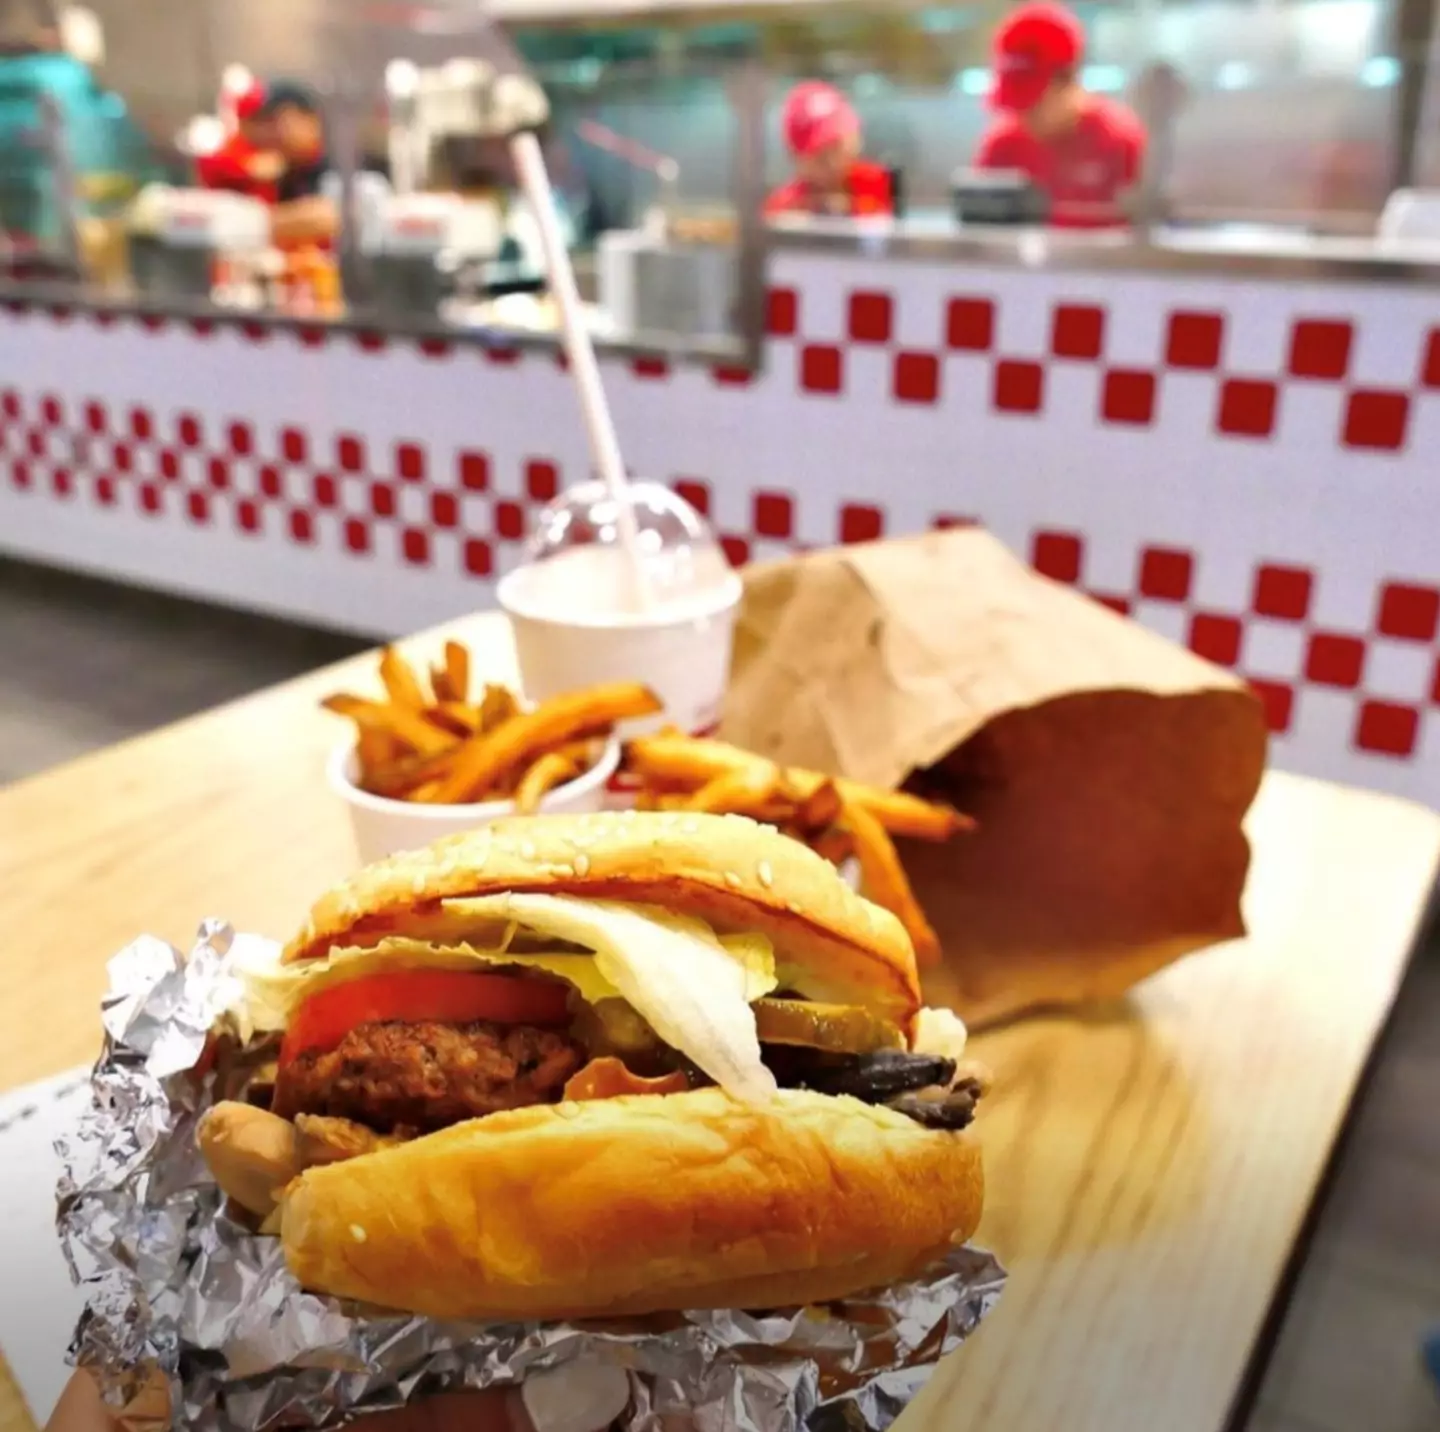 While Five Guys isn't cheap, it's certainly generous.